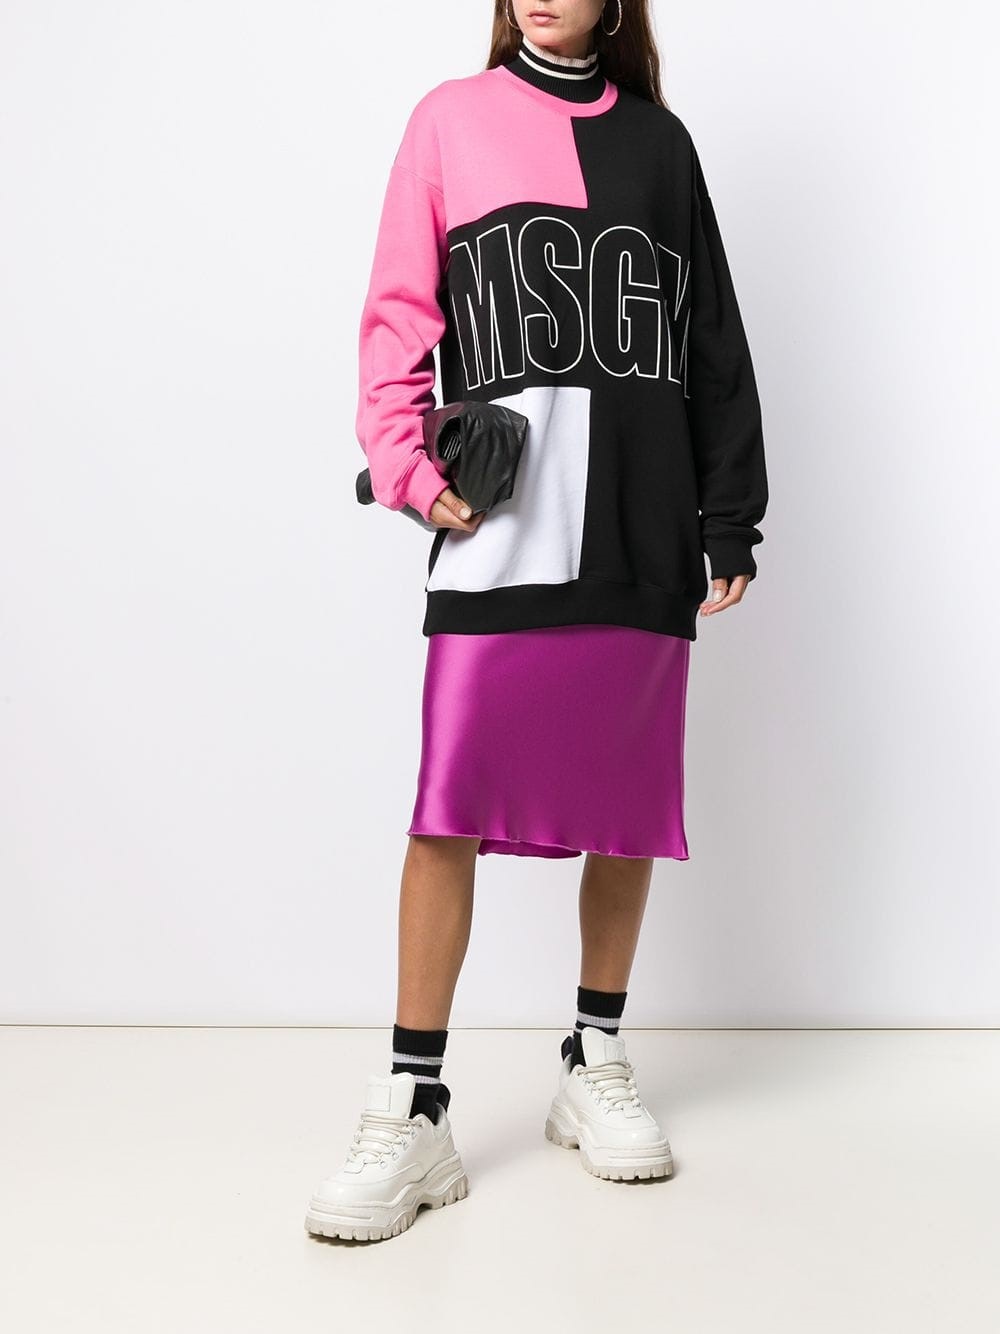 msgm LOGO PRINT SWEATER available on montiboutique.com - 29857